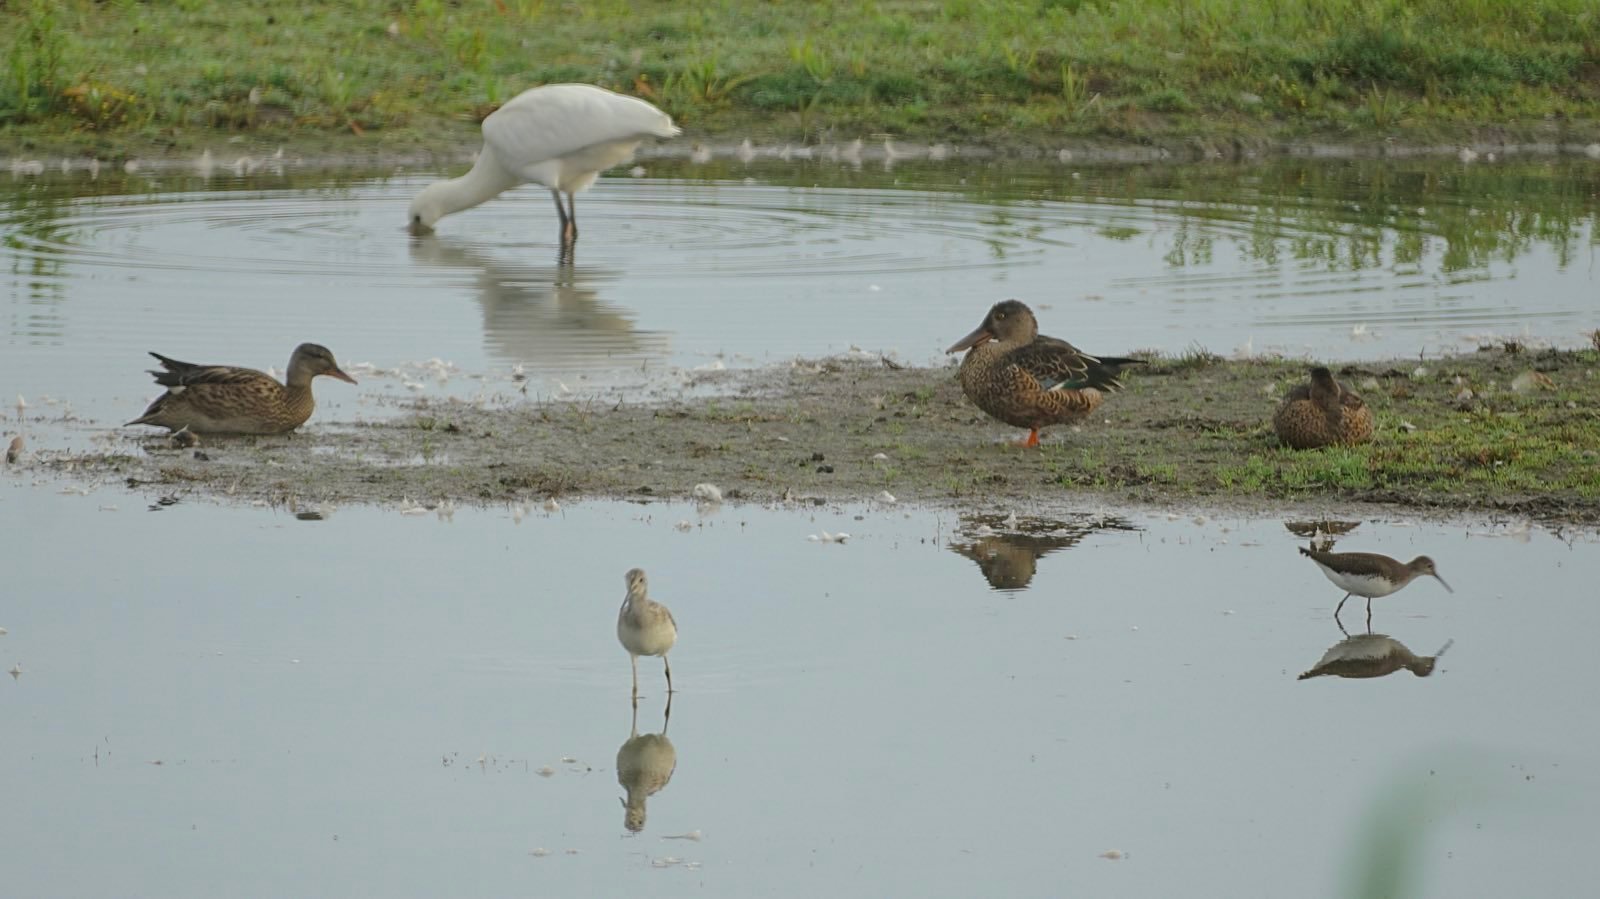 Some ducks and plovers in the foreground, spoonbill in the background.